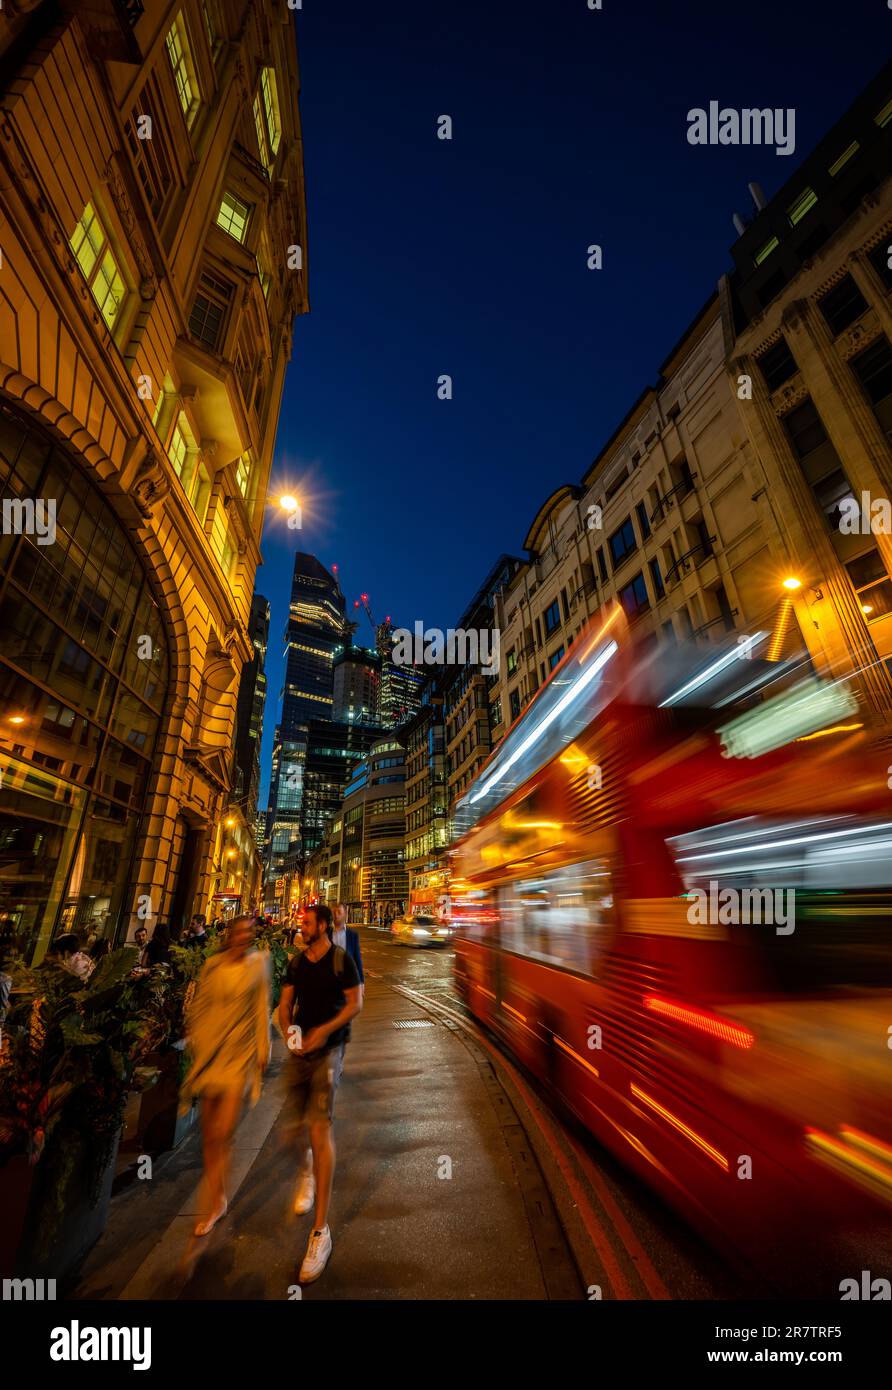 London, UK: Gracechurch Street in the City of London at night. People walk along the pavement as a red London bus passes by. Tall buildings behind. Stock Photo